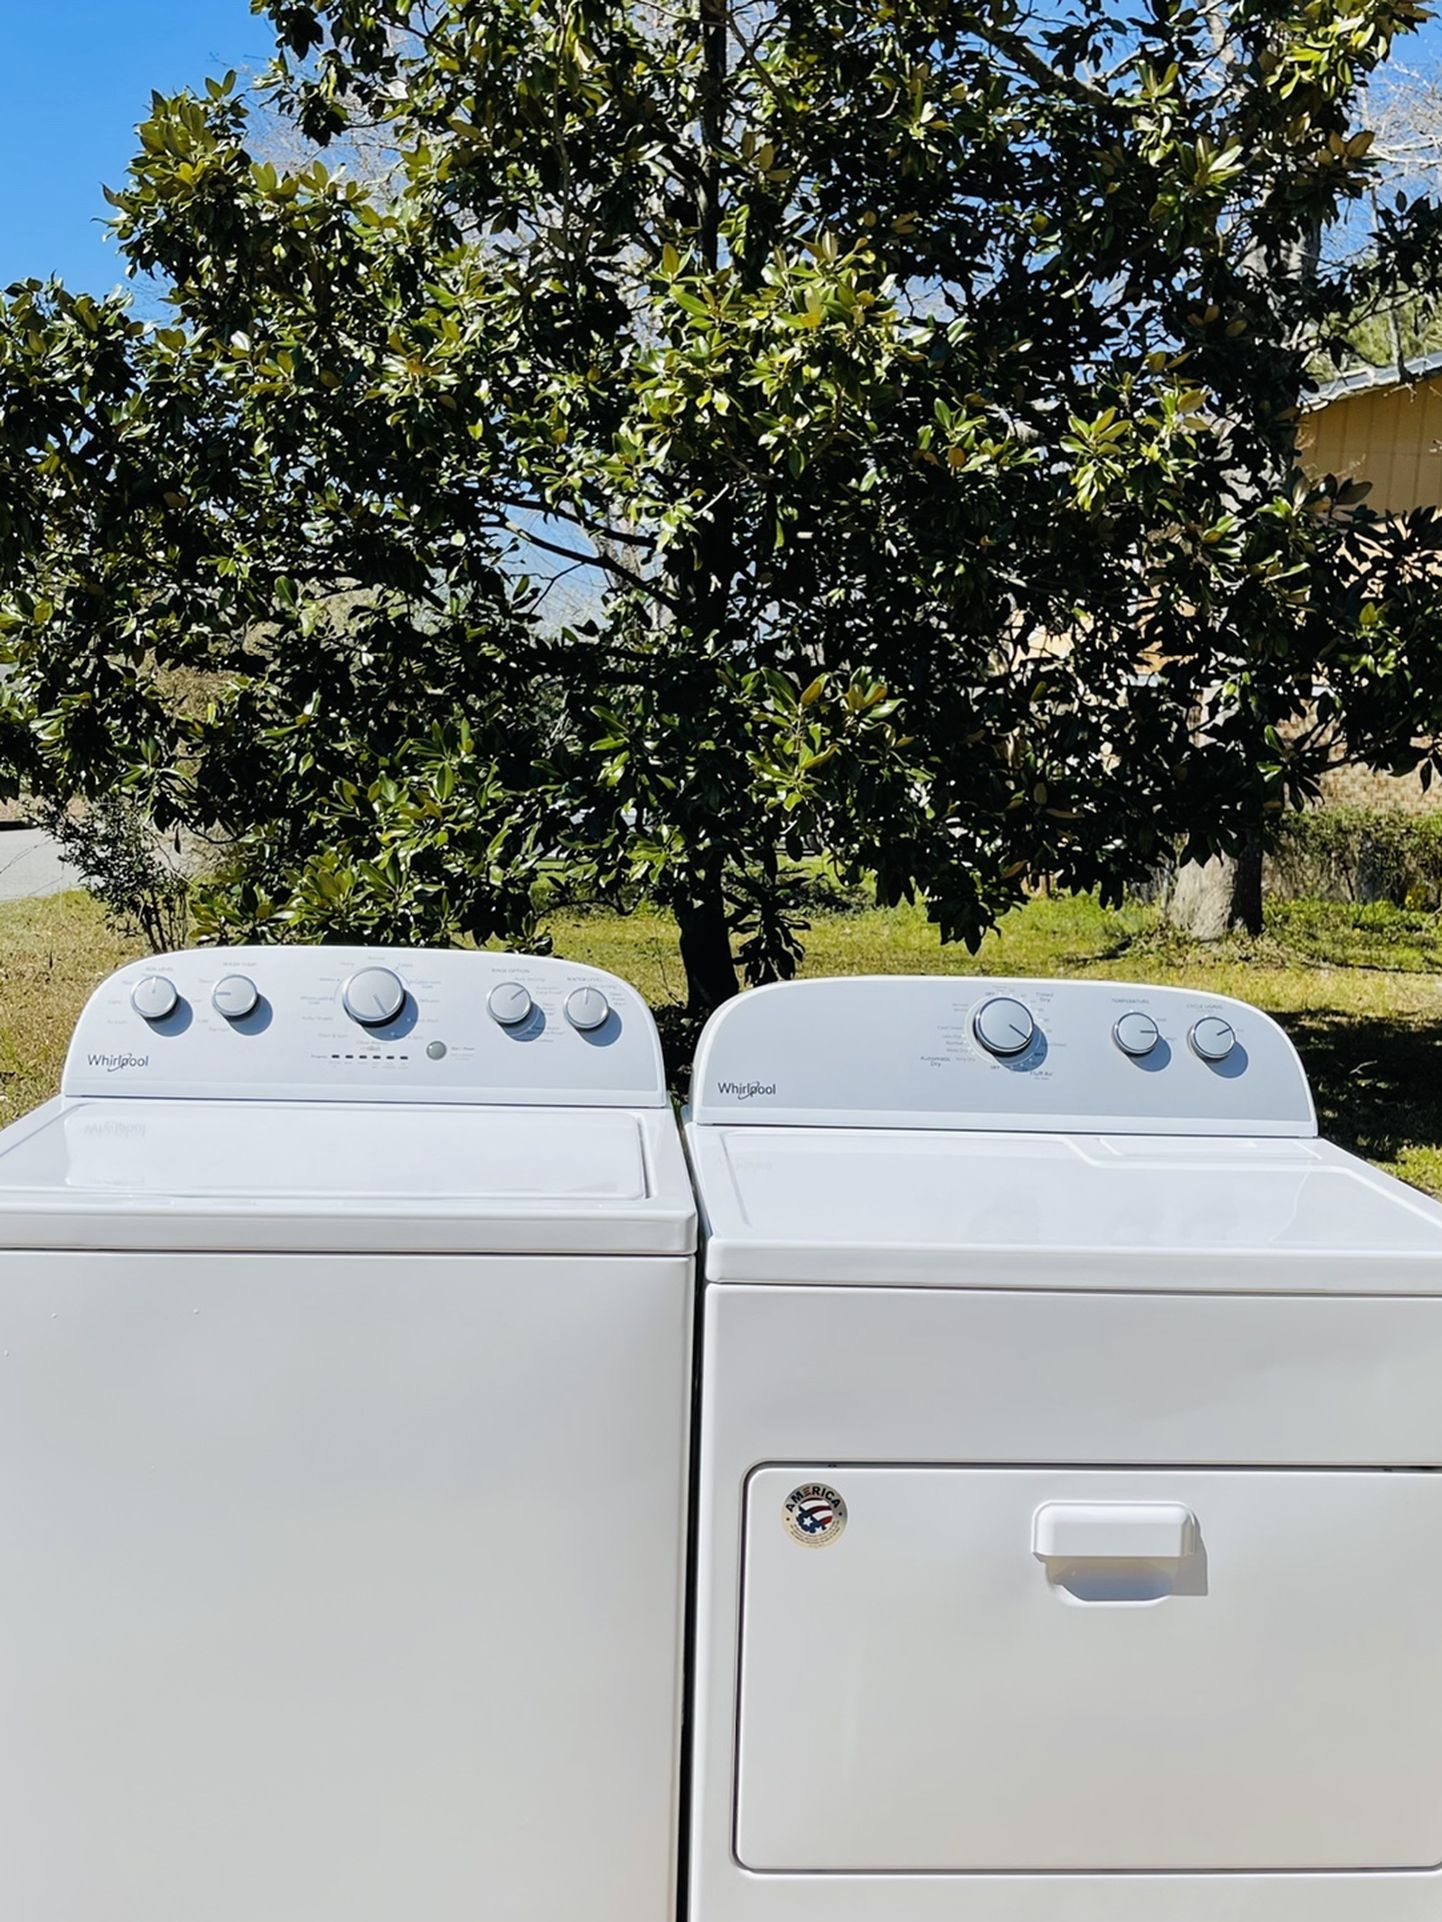 🌊 Barely Used Eco🍃Matching Whirlpool Washer and Dryer Set Available 🌊